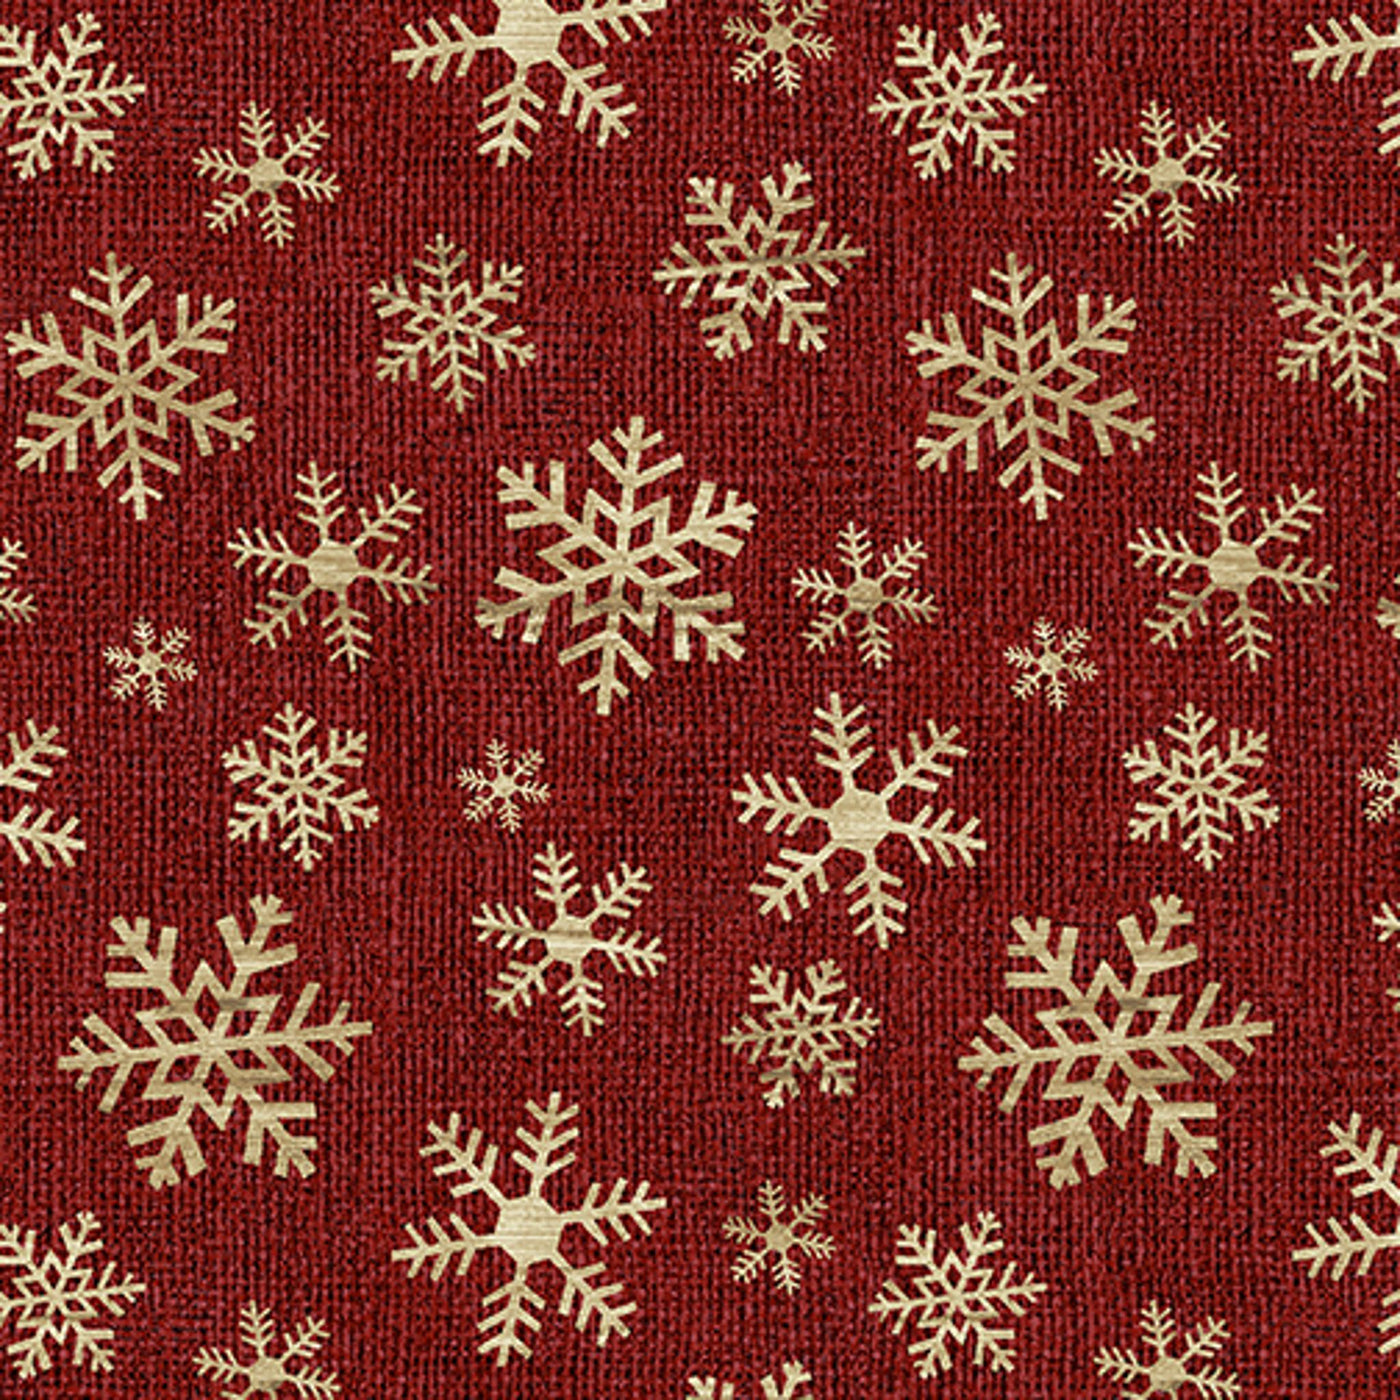 Crossroads Snowflake red 10316 10